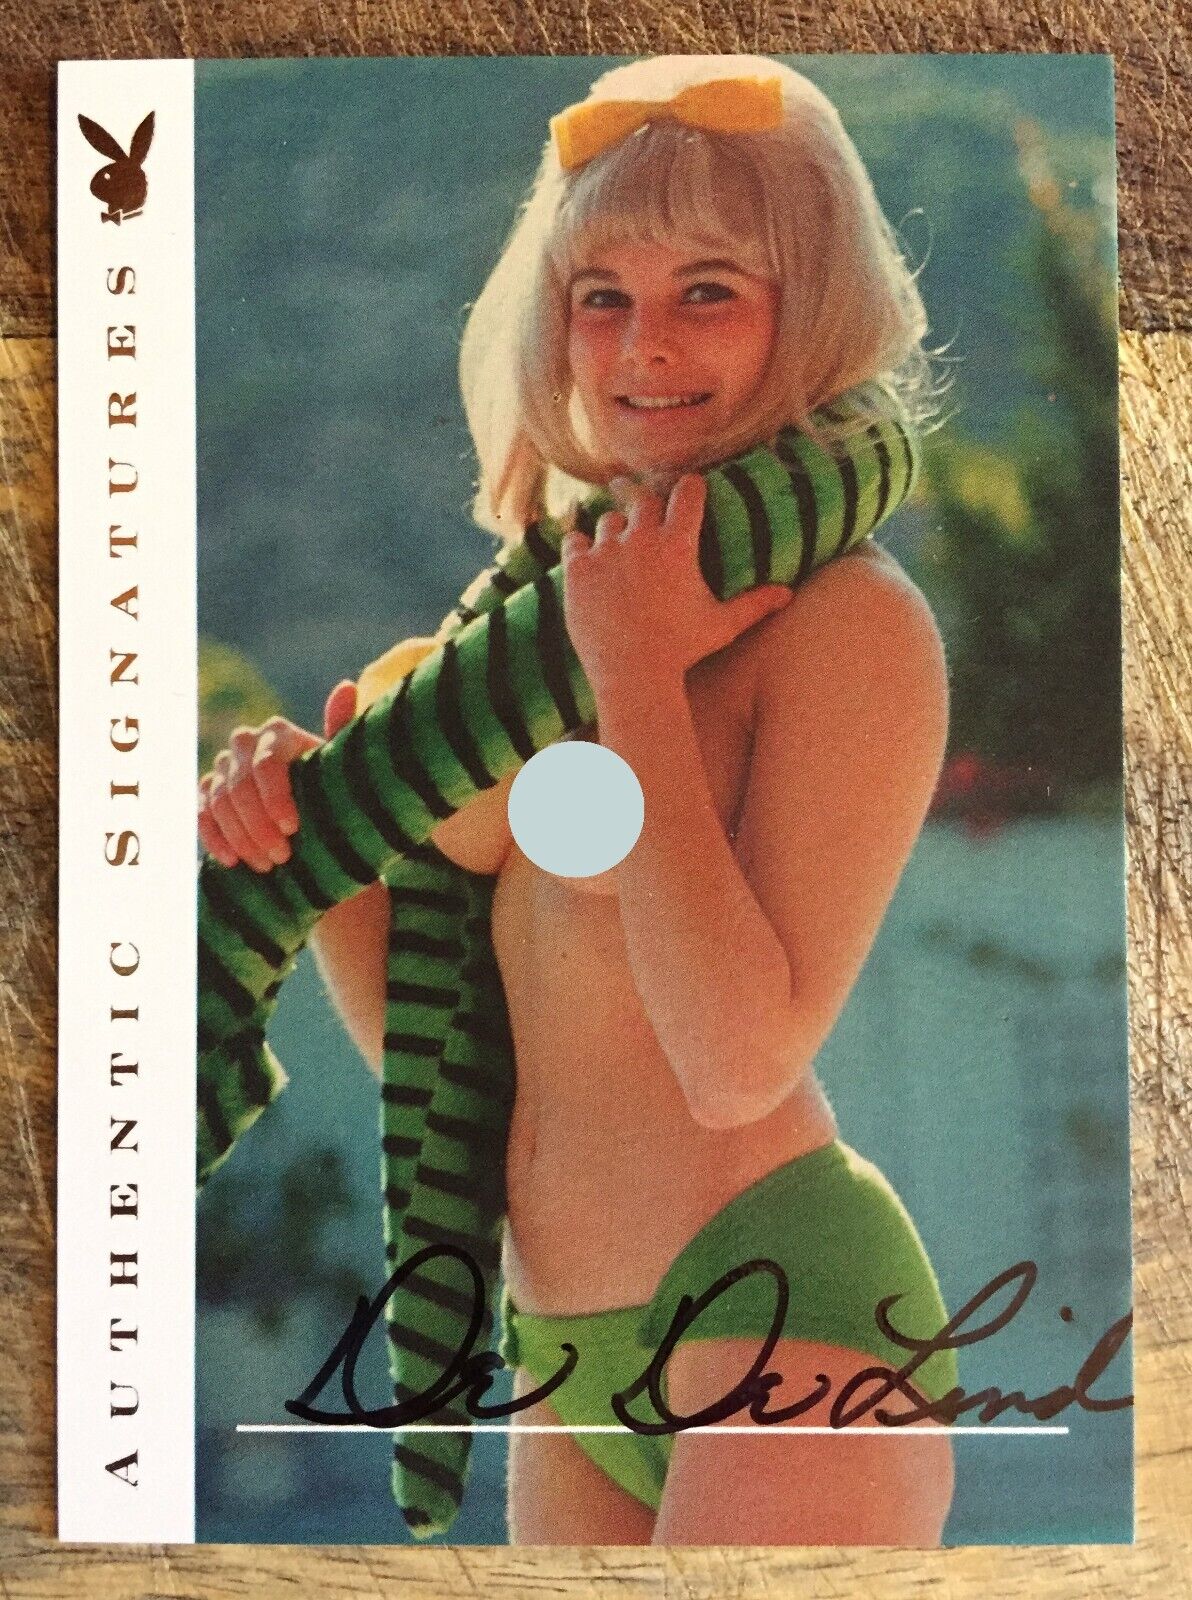 2000 Playboy DEDE LIND SIGNED Card / Centerfolds of the Century Chase Insert